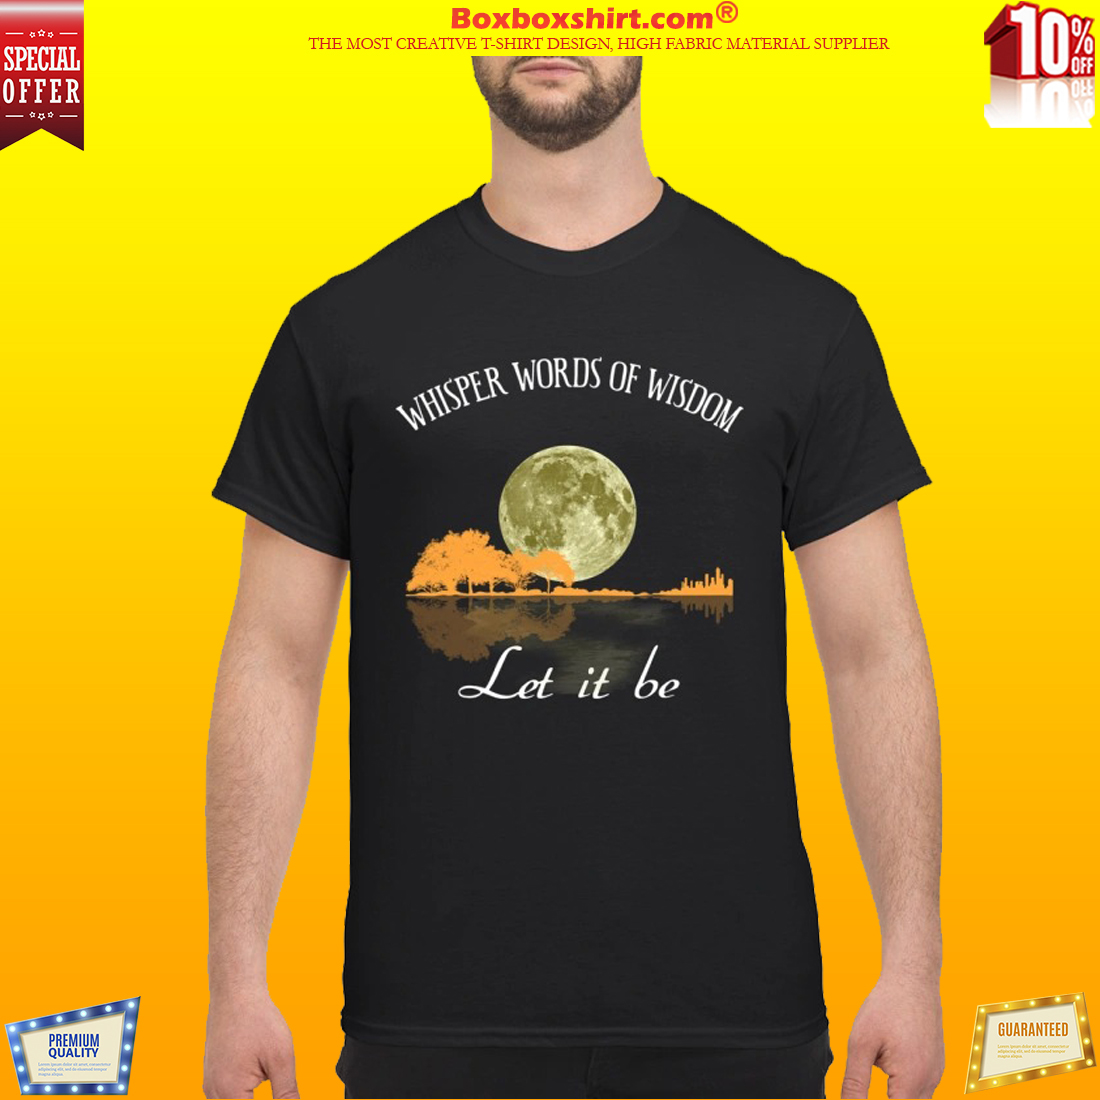 Guitar and moon whisper words of wisdom let it be shirt